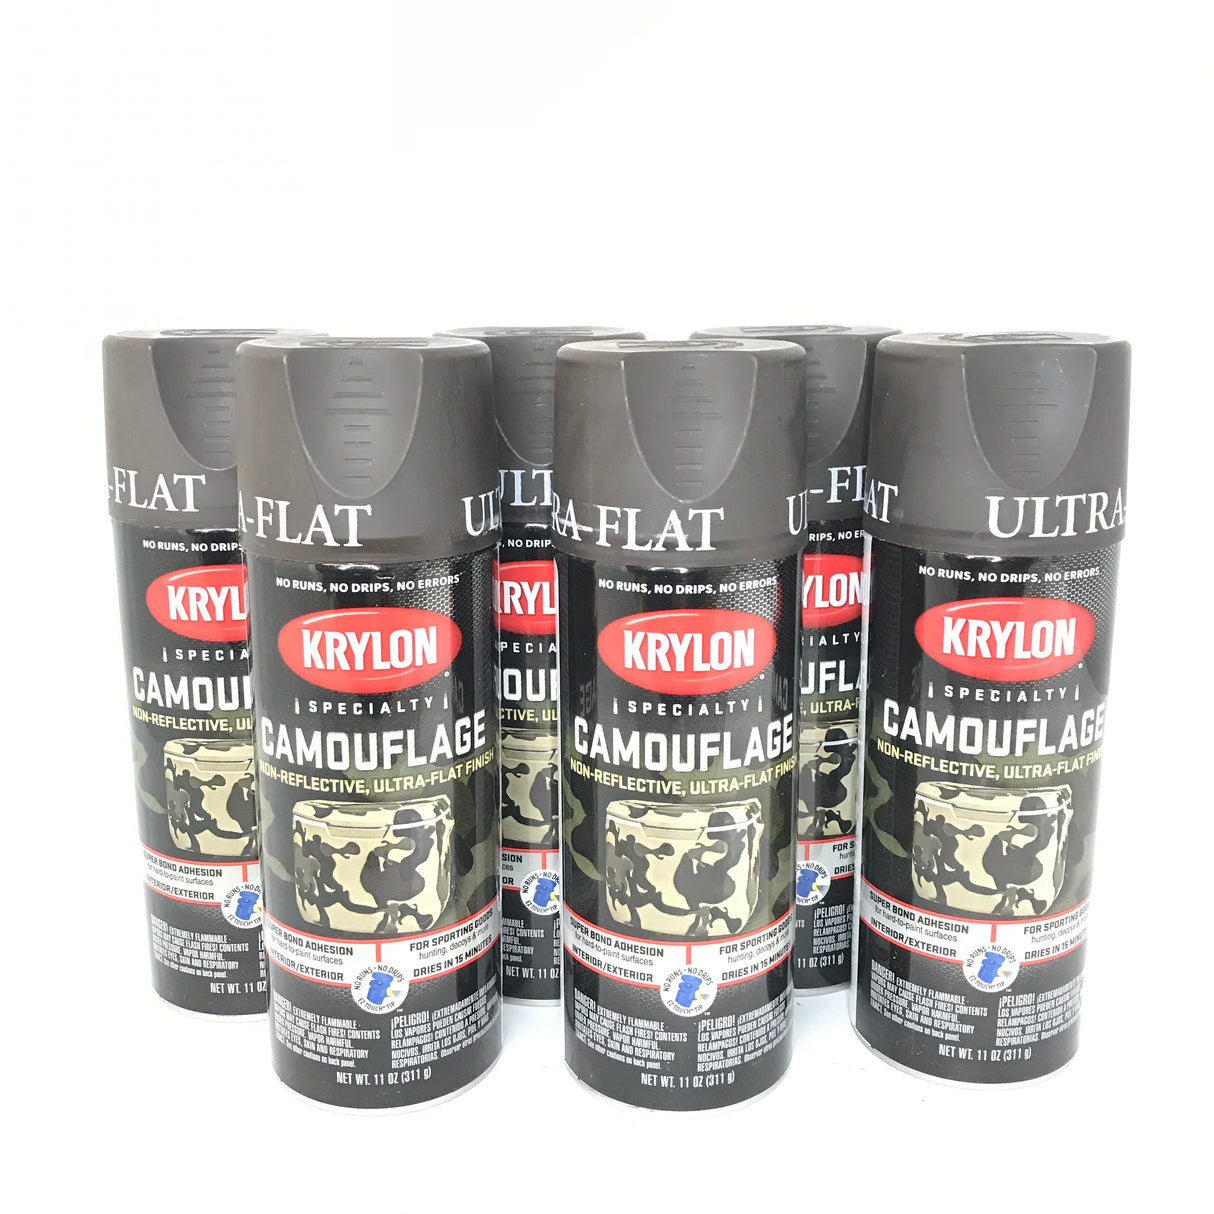 KRYLON 4292-6 PACK BROWN Camouflage Non-Reflective Ultra-Flat Finish Spray Paint- 11oz